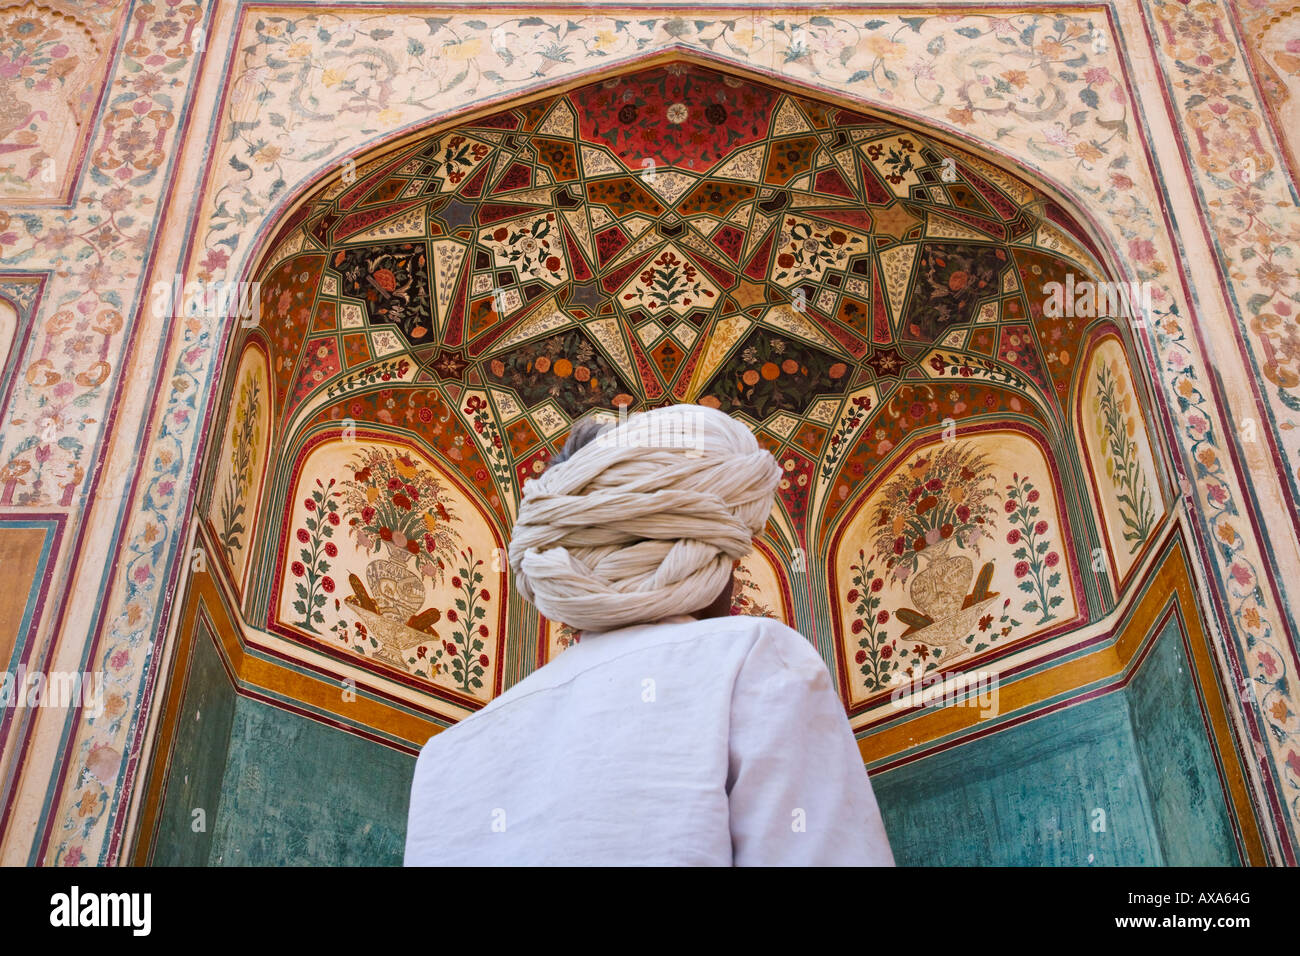 Man with ornate arcade decorated with tileworks inside Amber Palace Jaipur Rajasthan India Stock Photo